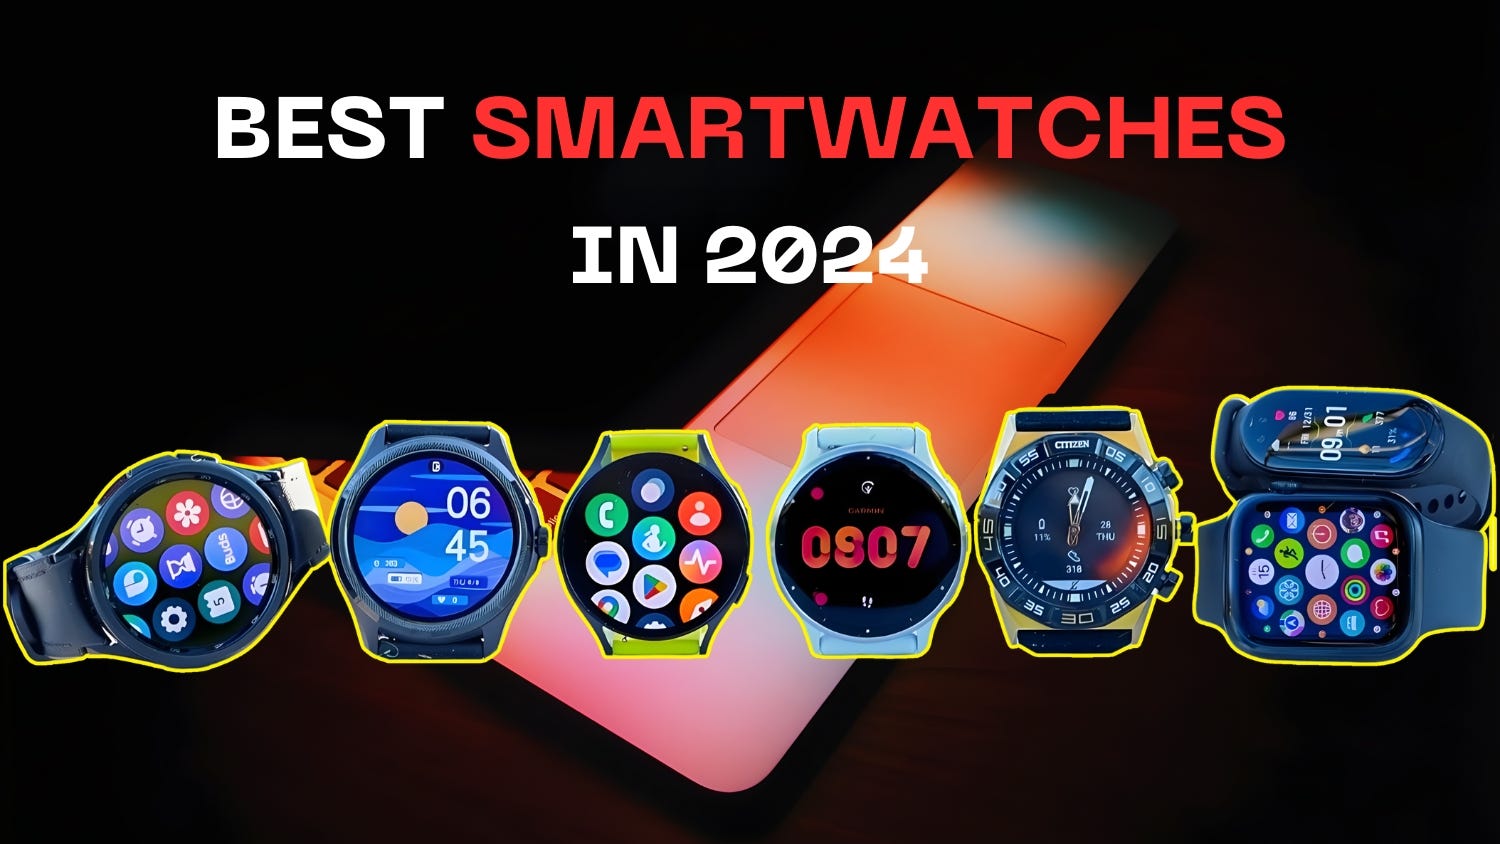 7 Best Smart Watches for Women in 2024, According to Tech Experts